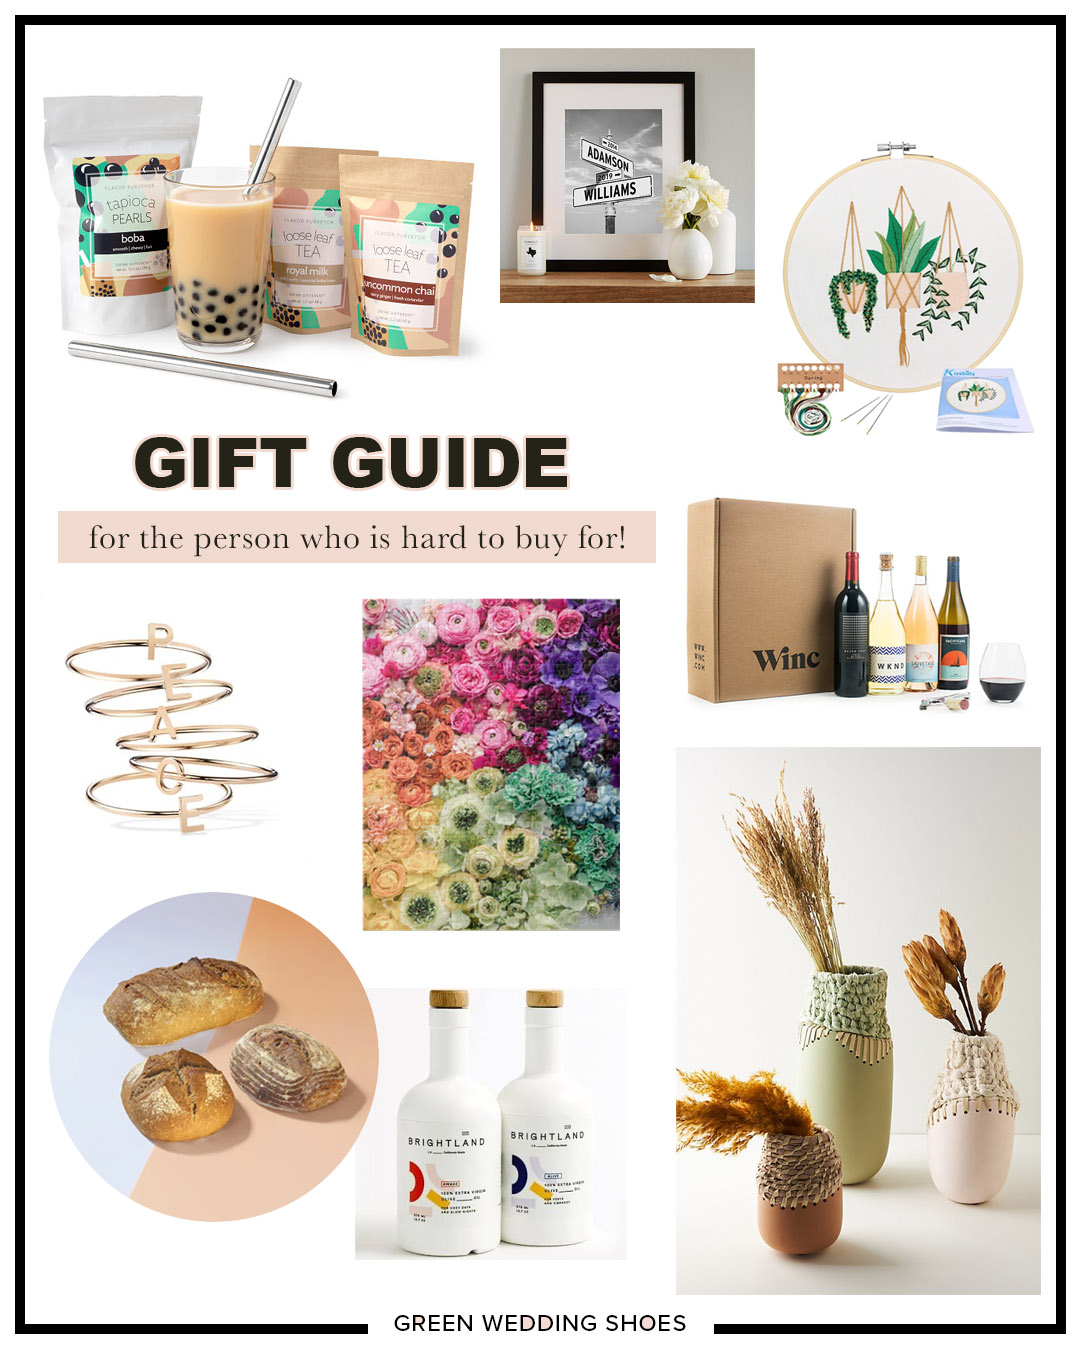 Gift Guide for the Person Who is Hard to Buy For